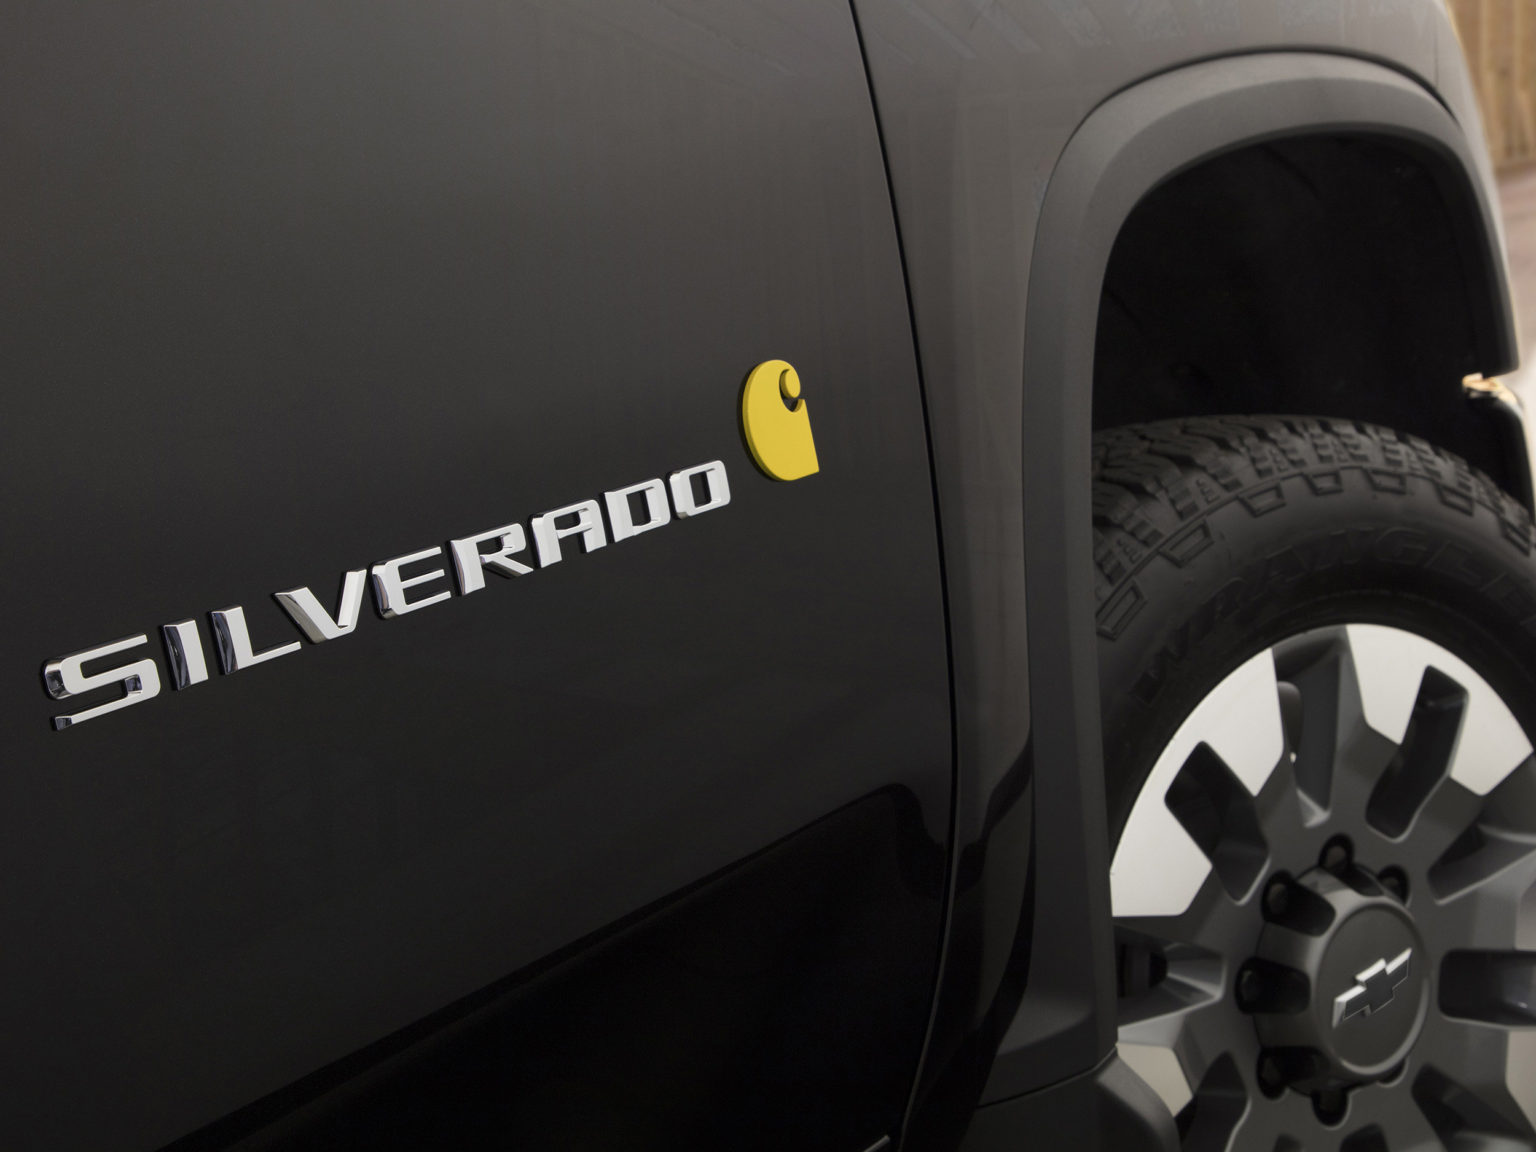 Chevrolet has teamed up with Carhartt to offer a new special edition truck for the 2021 model year.